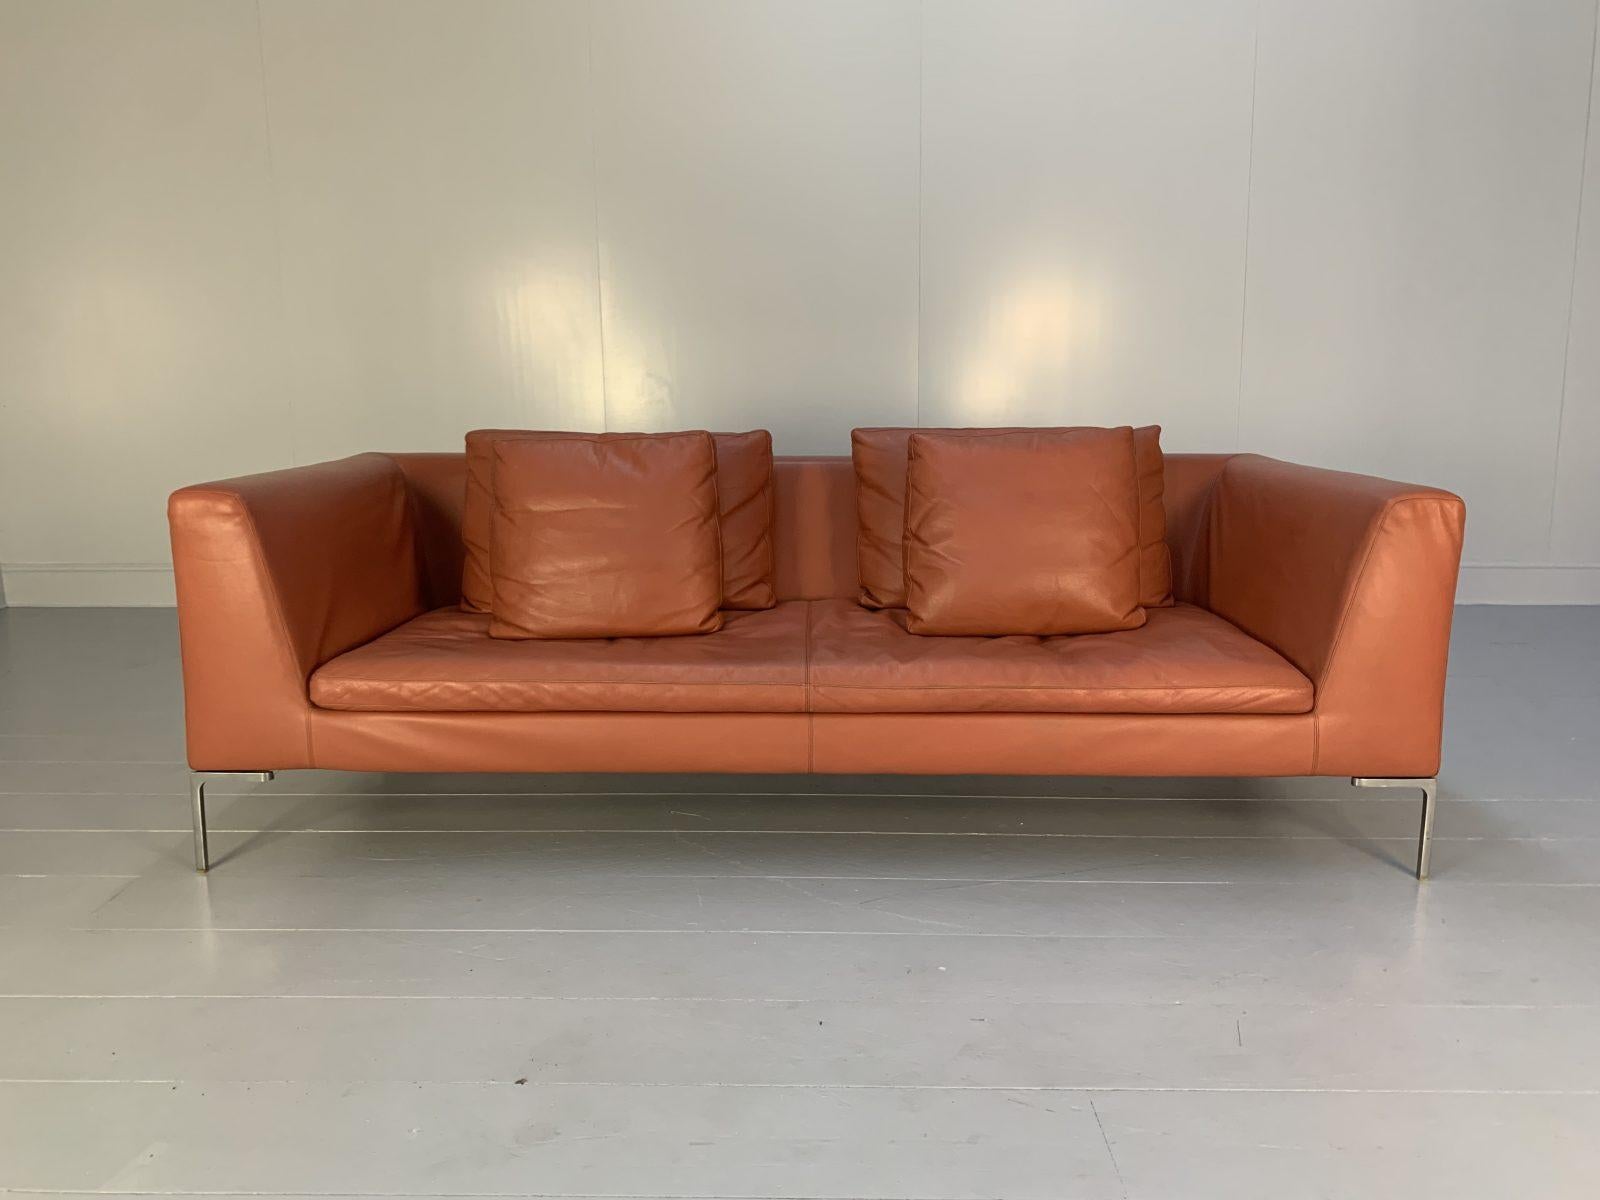 Hello Friends, and welcome to another unmissable offering from Lord Browns Furniture, the UK’s premier resource for fine Sofas and Chairs.

On offer on this occasion is an iconic “Charles CH230” 3-Seat Sofa from the “Maxalto” range of seating from